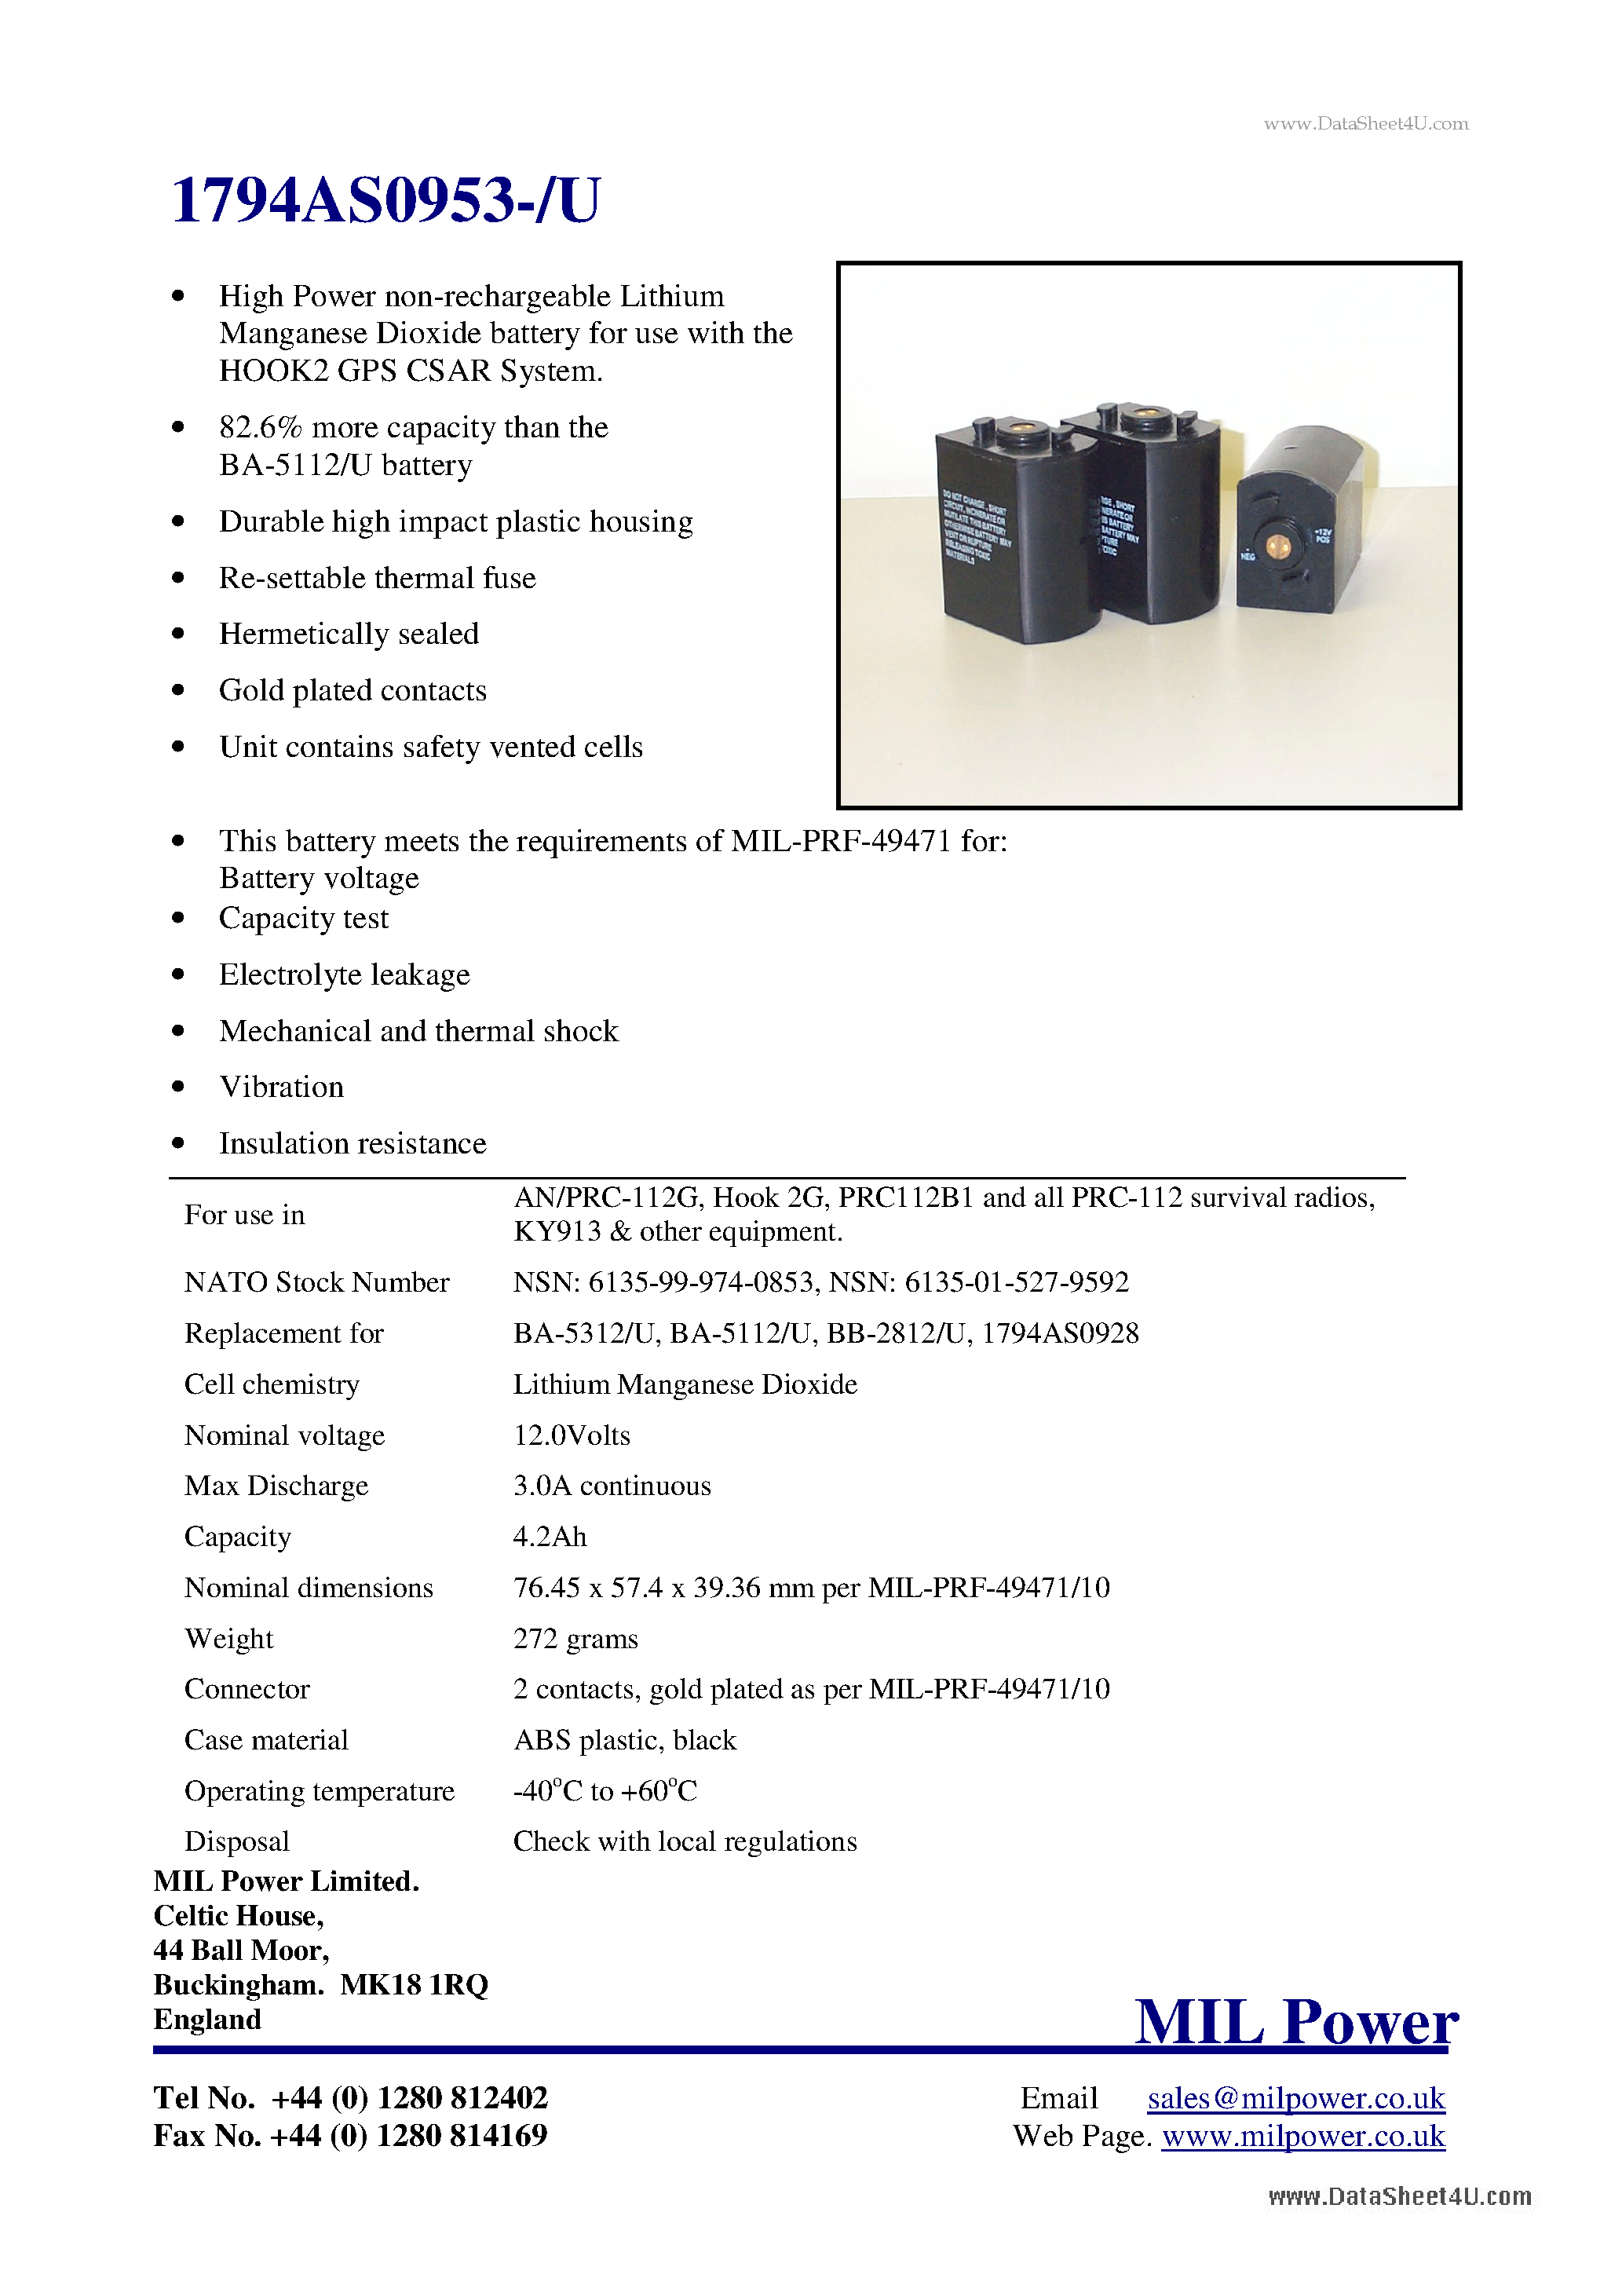 Datasheet 1794AS0953-/U - High Power non-rechargeable Lithium Manganese Dioxide battery page 1